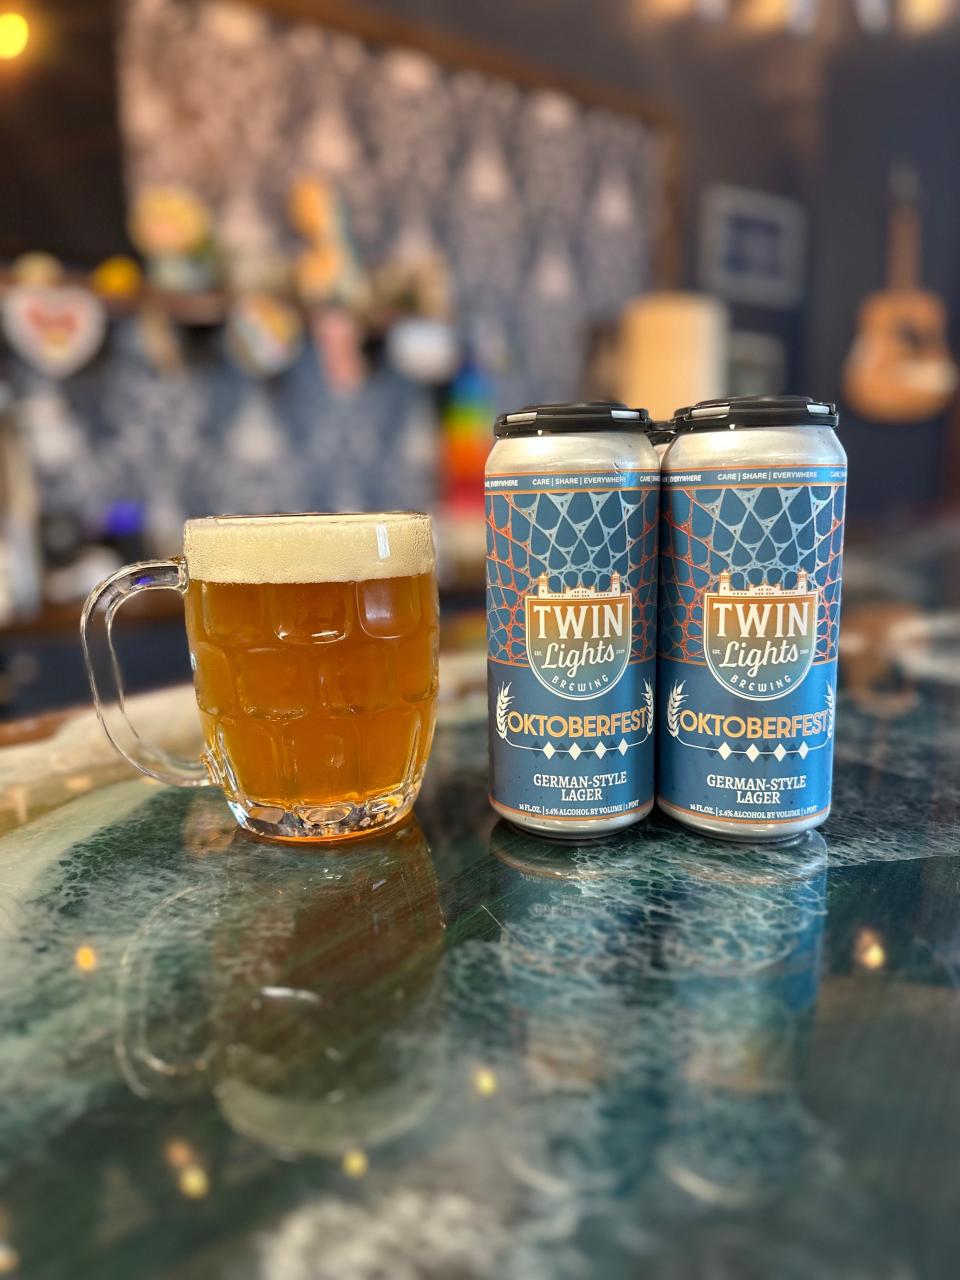 Oktoberfest German-style Lager from Twin Lights Brewing in Tinton Falls.